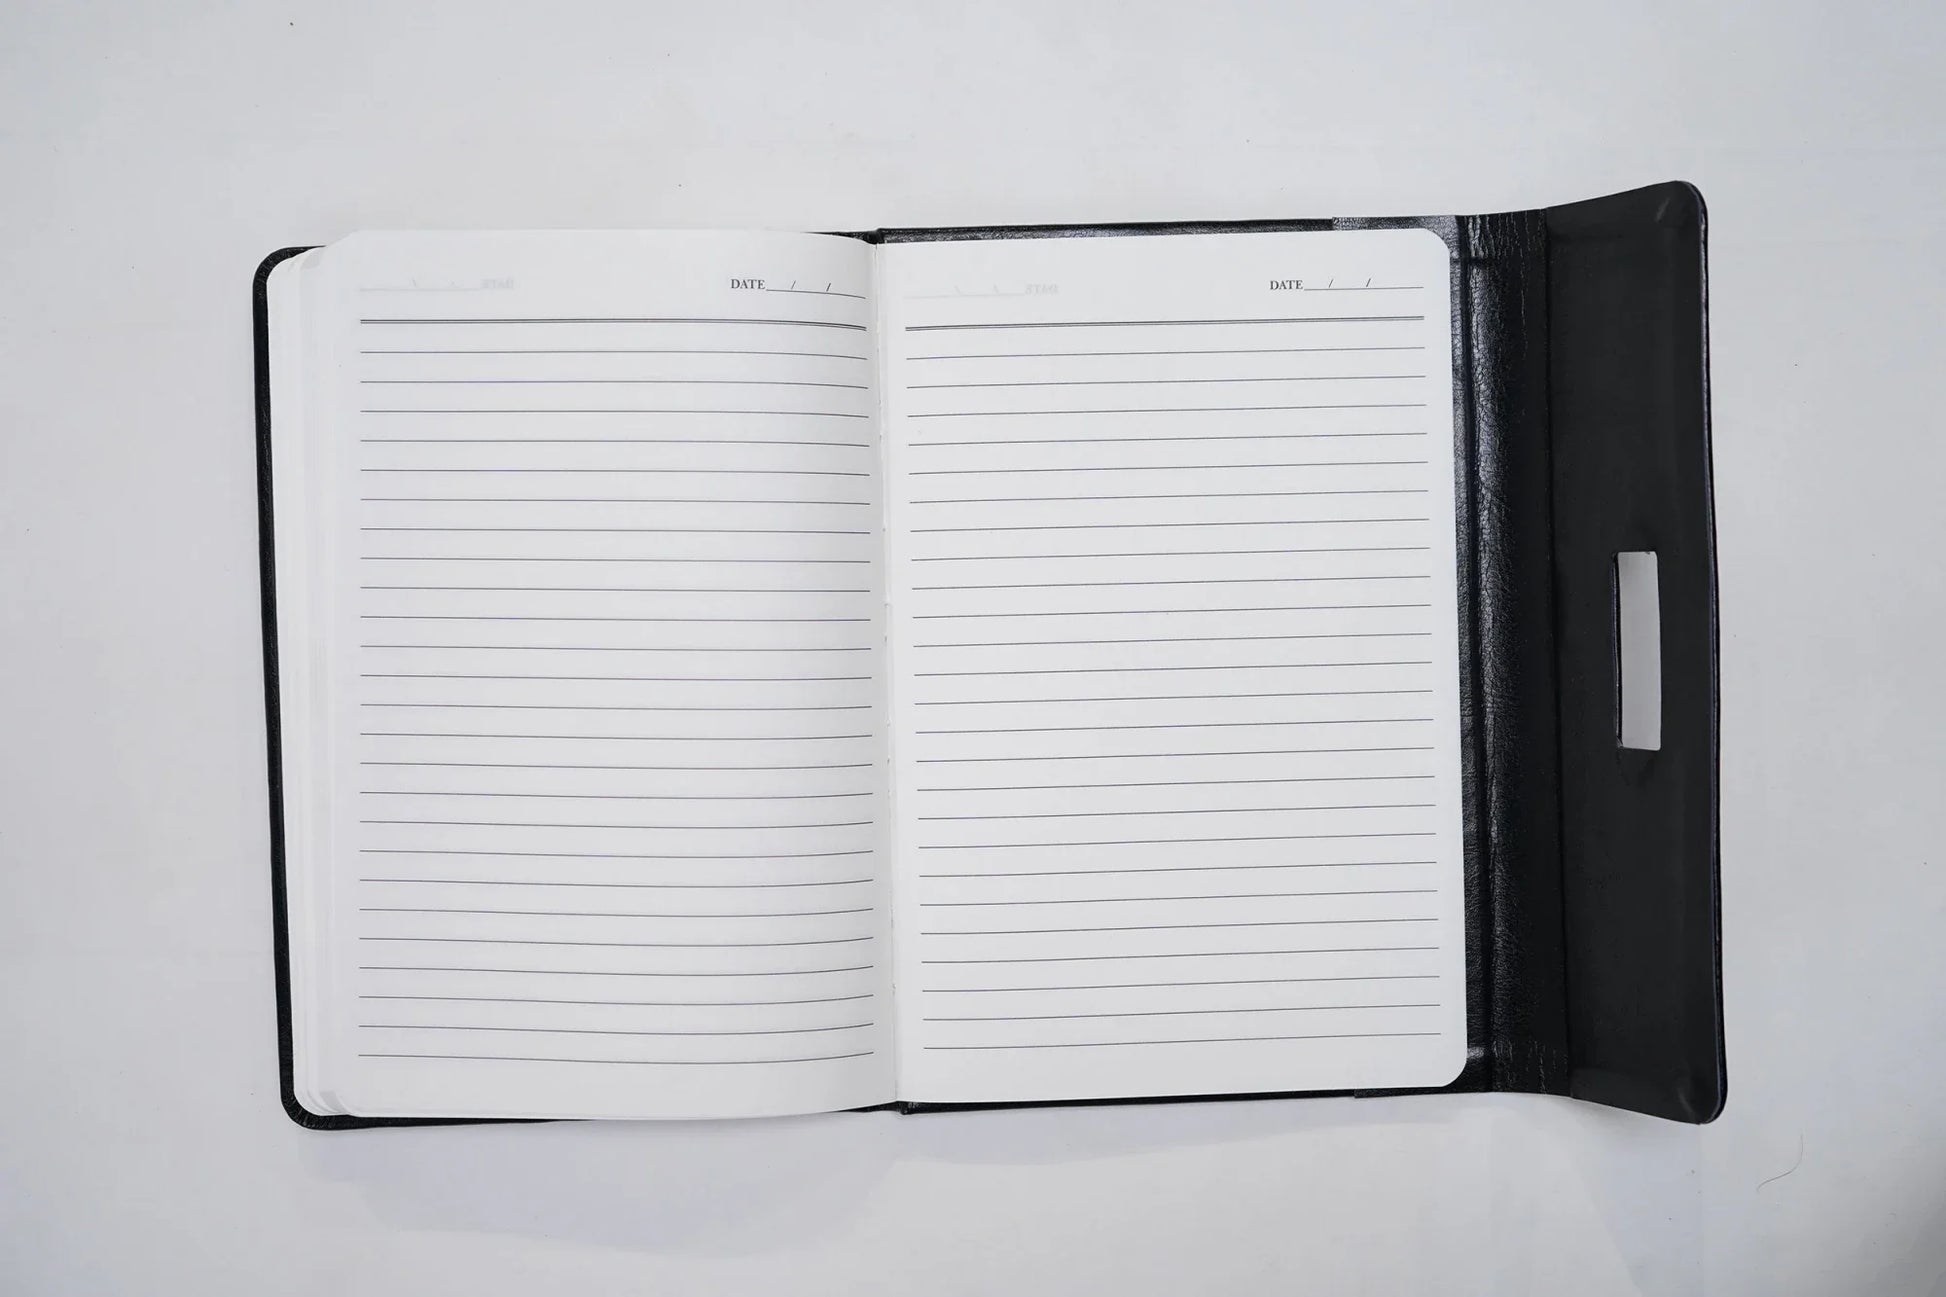 Keep your thoughts, ideas, and memories organized with our premium quality diary. This diary is bound in soft, supple leather and features smooth, unlined pages, perfect for jotting down your musings and reflections.Inside or open view of diary